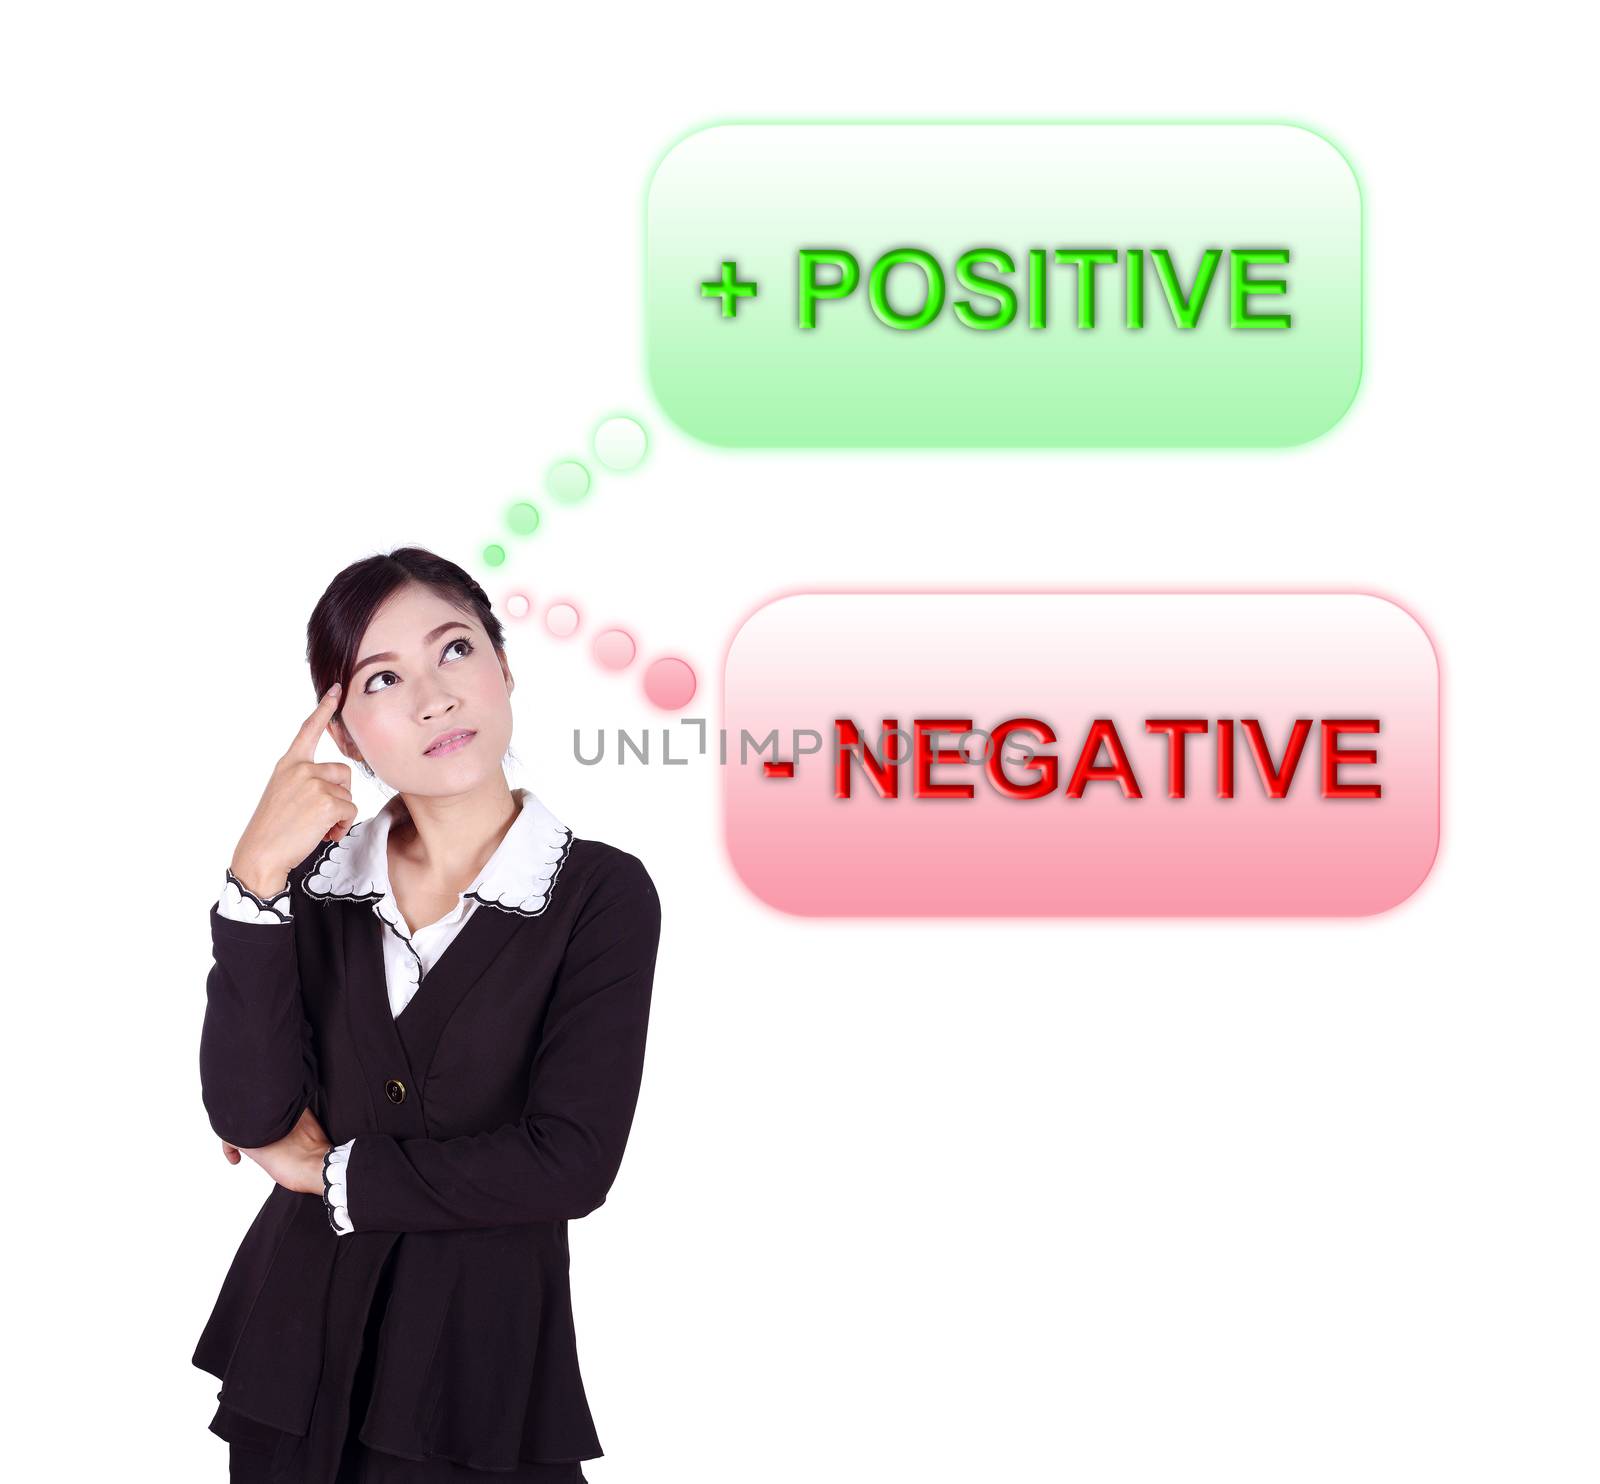 Business woman thinking about positive and negative thinking by geargodz